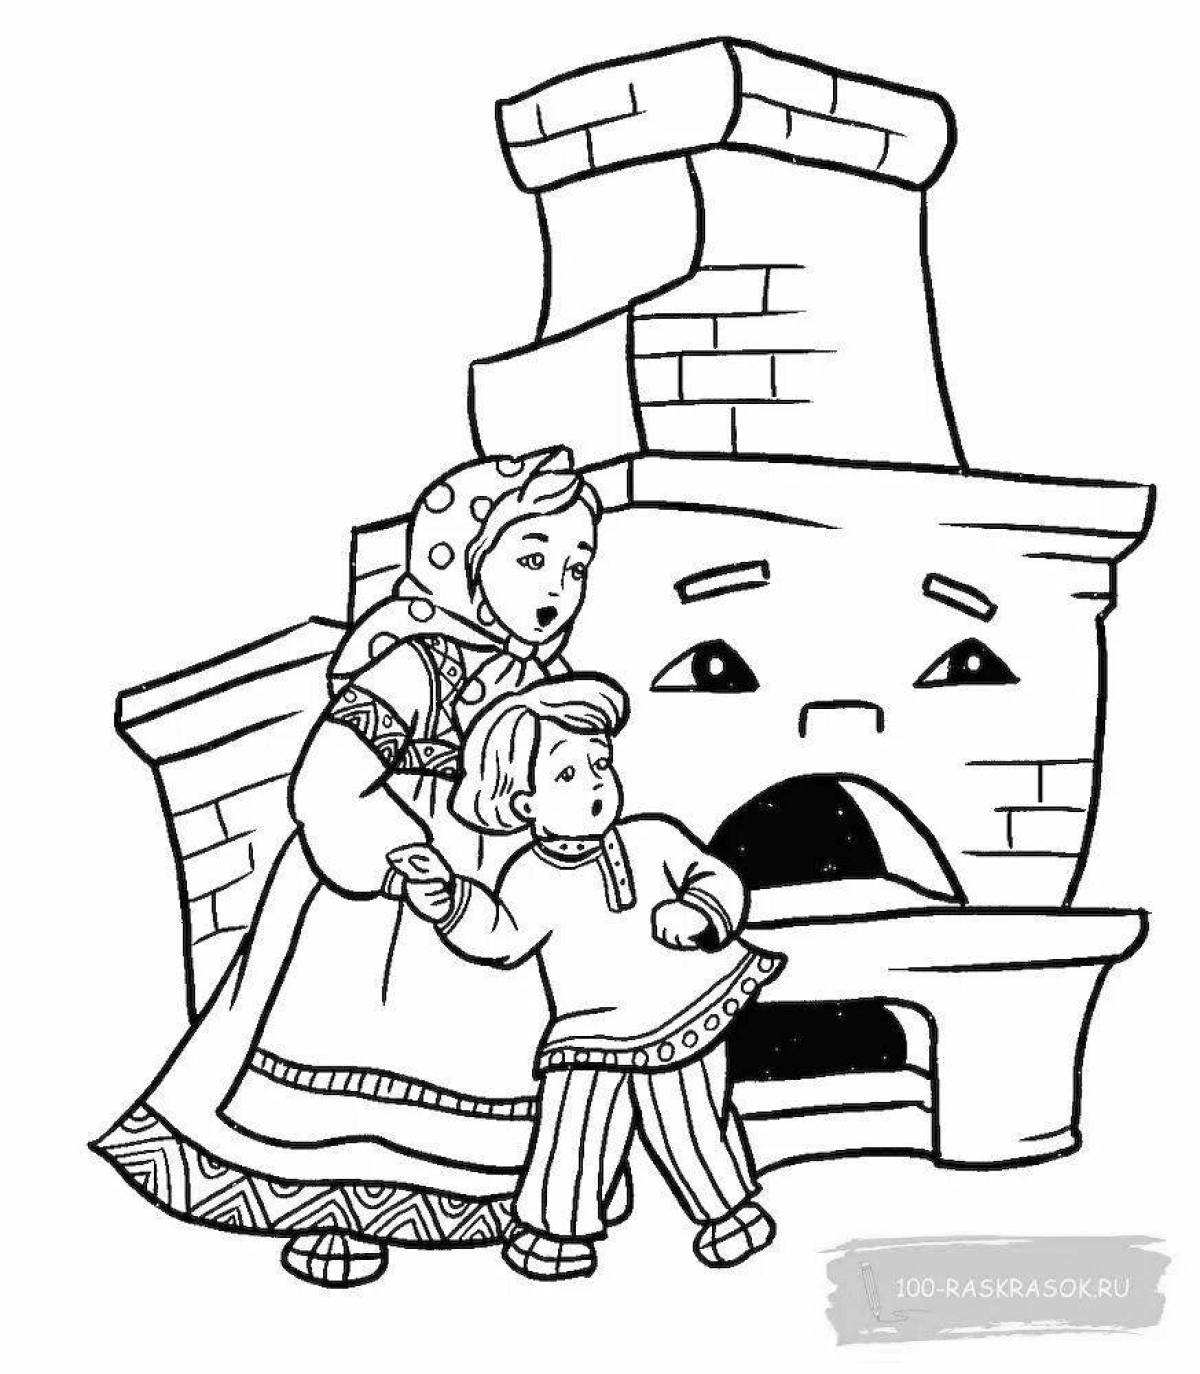 Shiny Russian oven coloring pages for kids